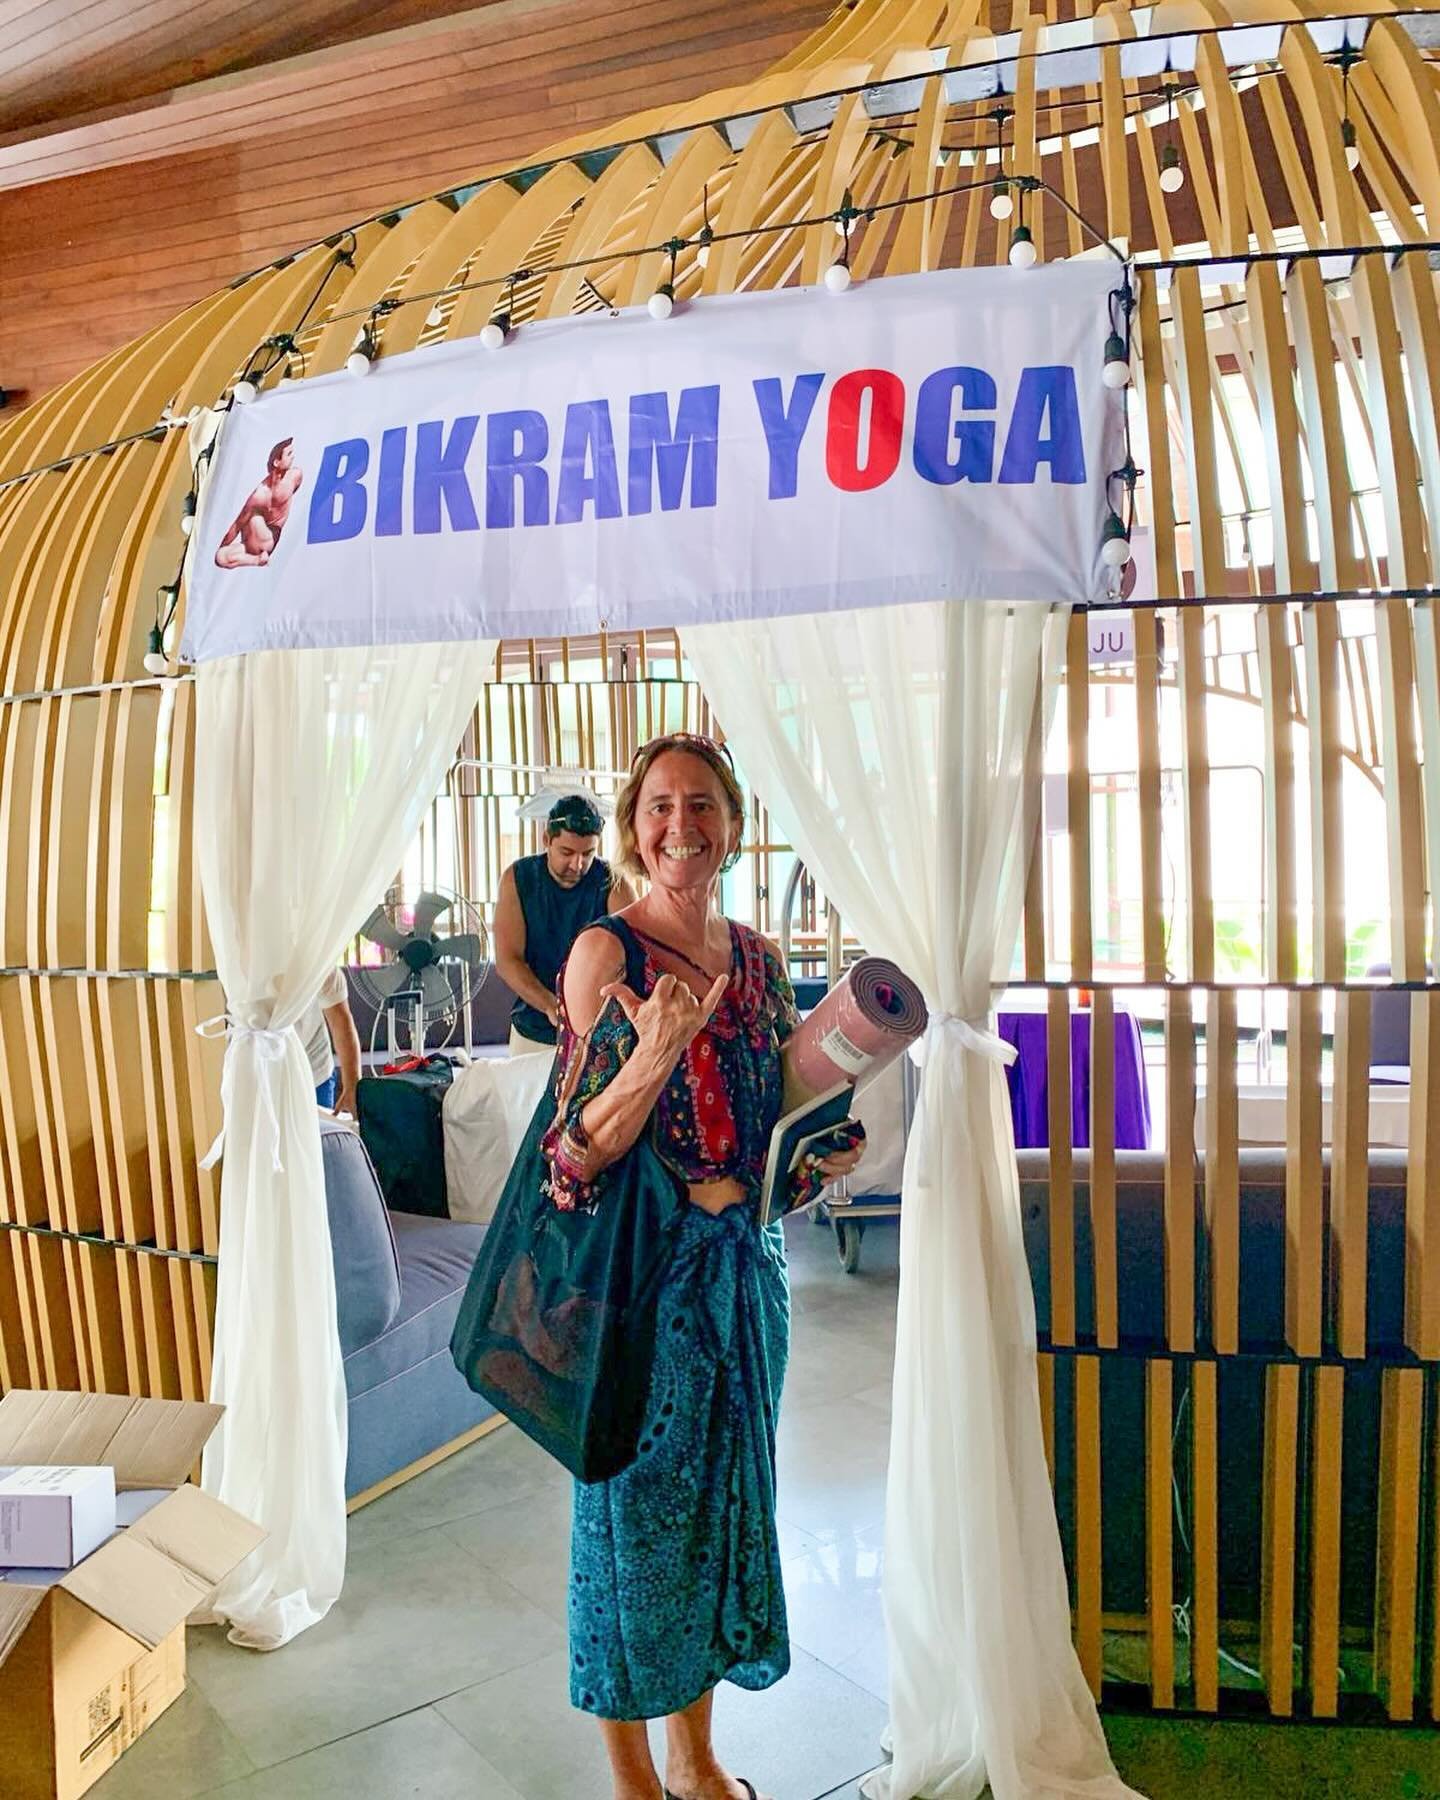 We are so happy to see Anne Marie living out her dream of going to Bikram teacher training. She traveled all the way to Thailand, to spend 9 weeks immersed in the yoga bubble. She has delivered her half moon in posture clinic which you all supported 